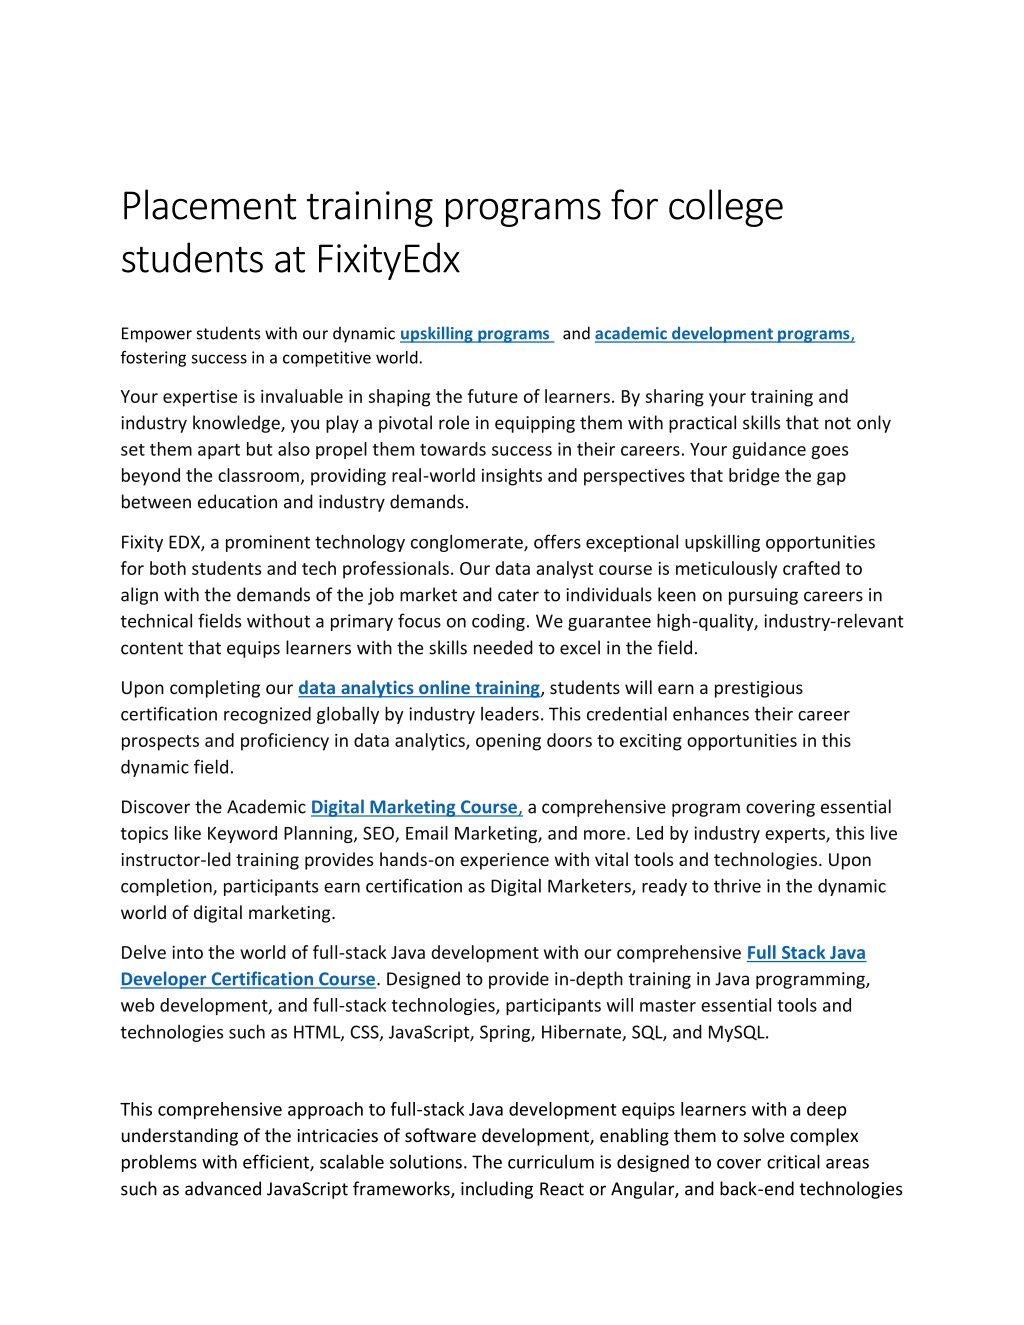 placement training programs for college students l.w